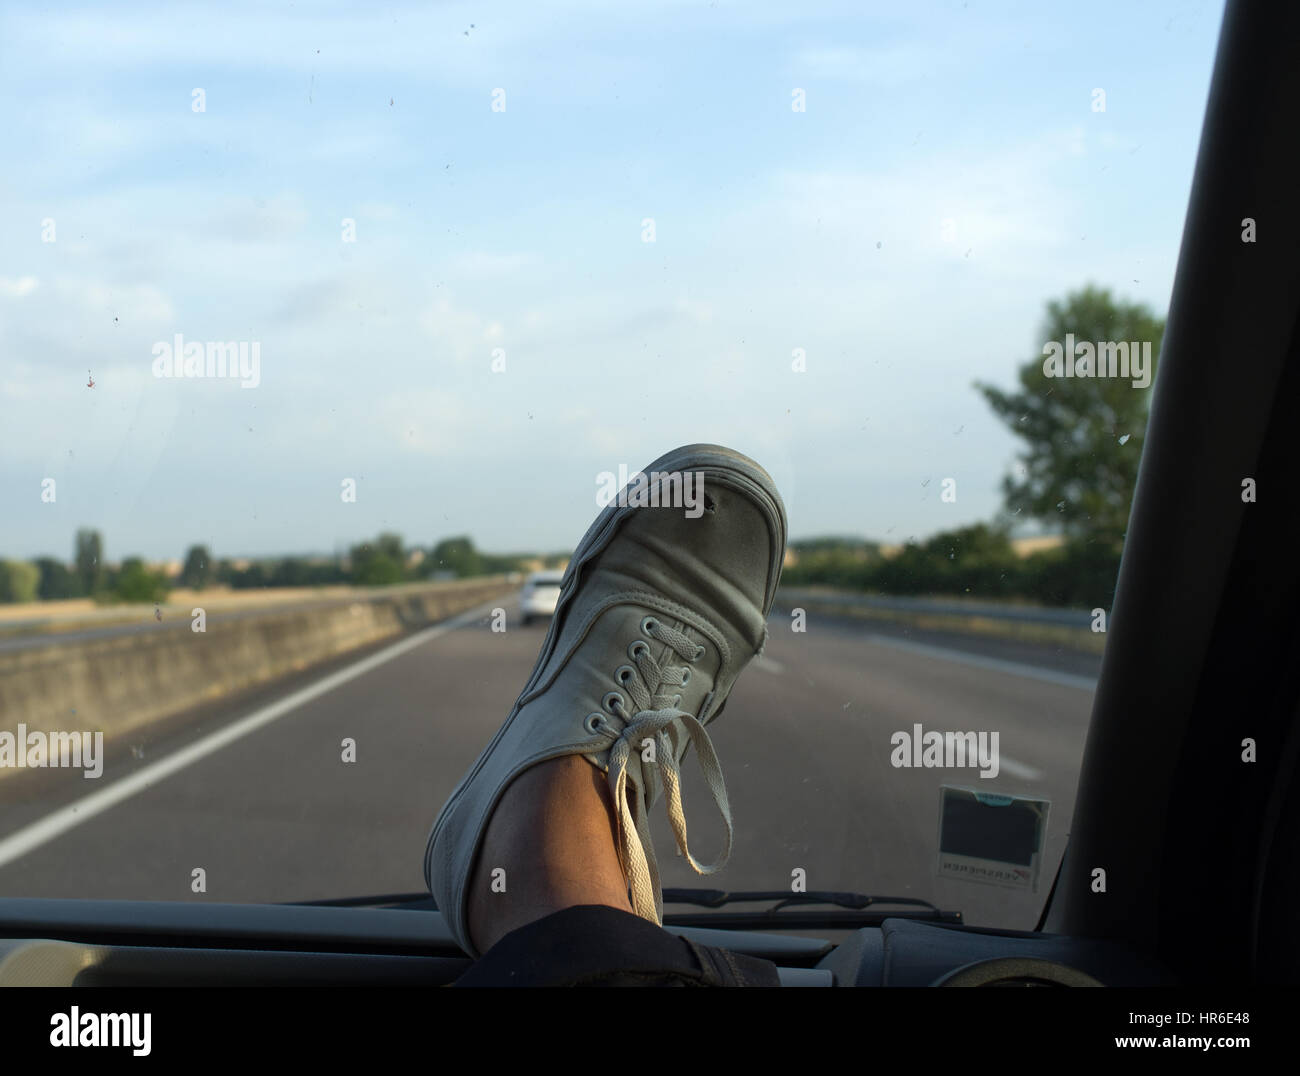 Vans Canvas shoe on the dashboard of a car speeding on a highway Stock Photo